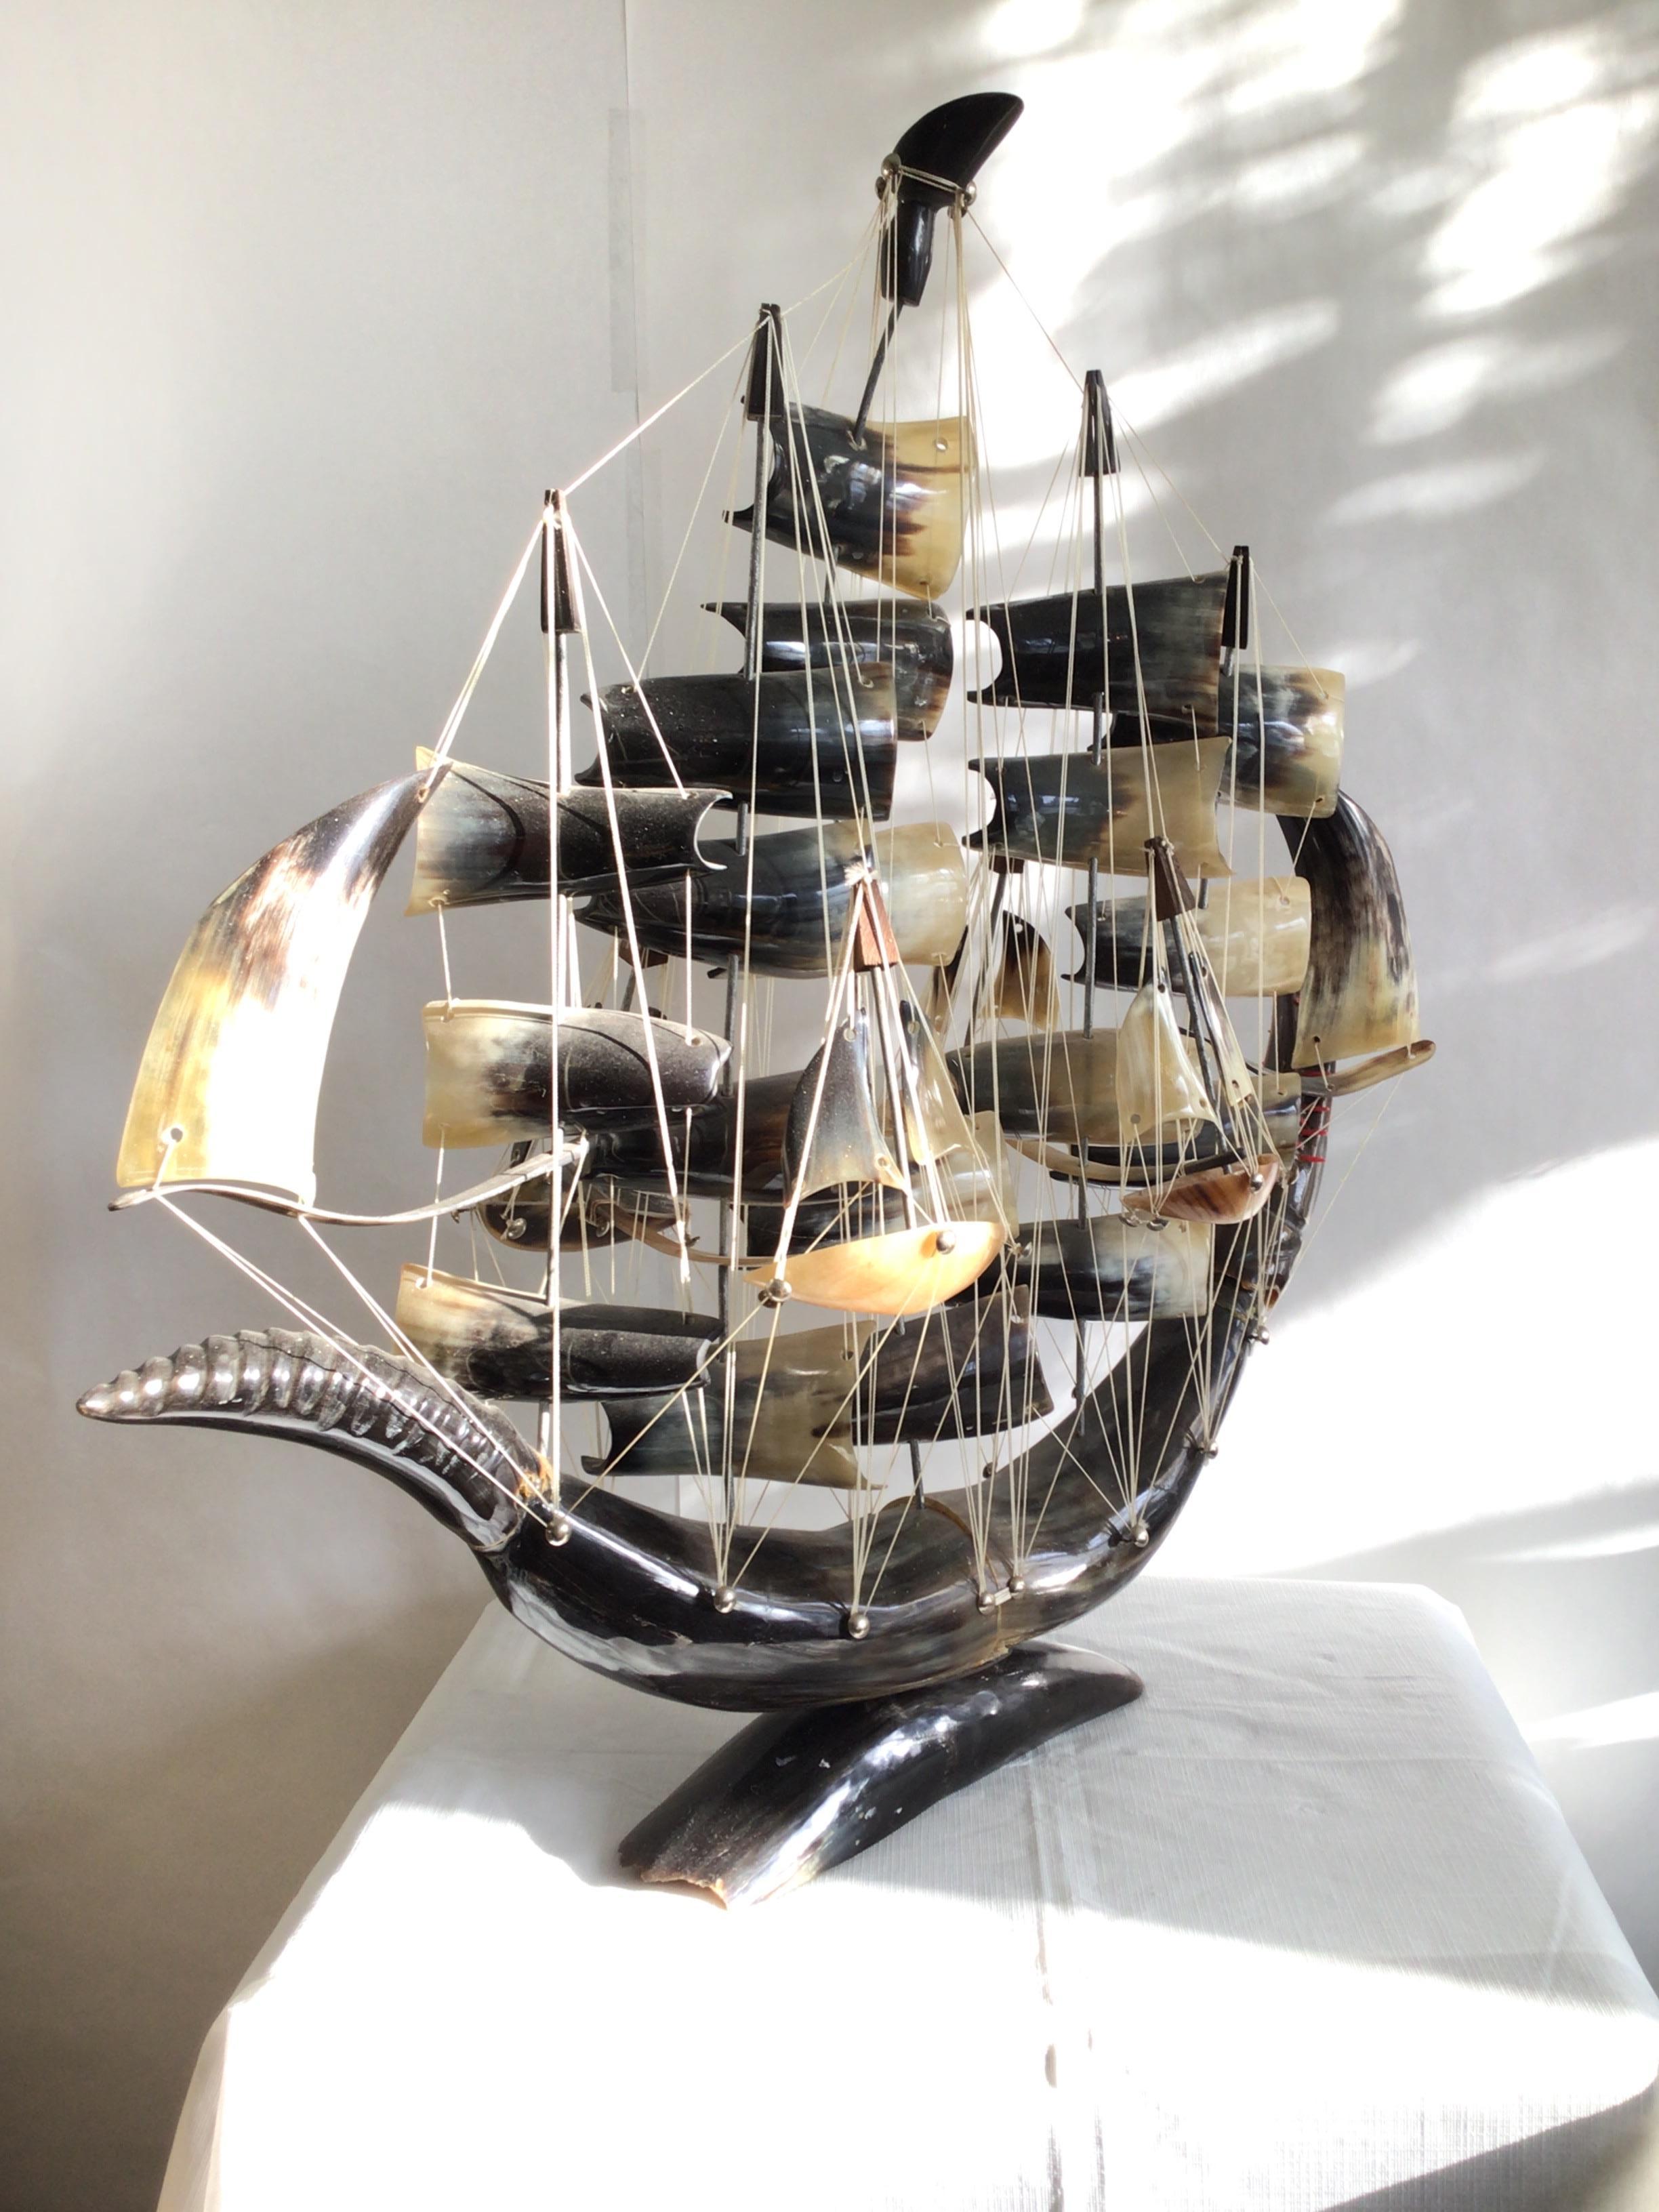 1950s Hand Carved Horn Ship on Horn Base - connected with string
Over 40 pieces of Horn in an impressive Size
Colors: Brown, White, Cream
Sailing ship
Nautical 
Handmade with real Horn bone, it has great details of a five-masted galleon, with